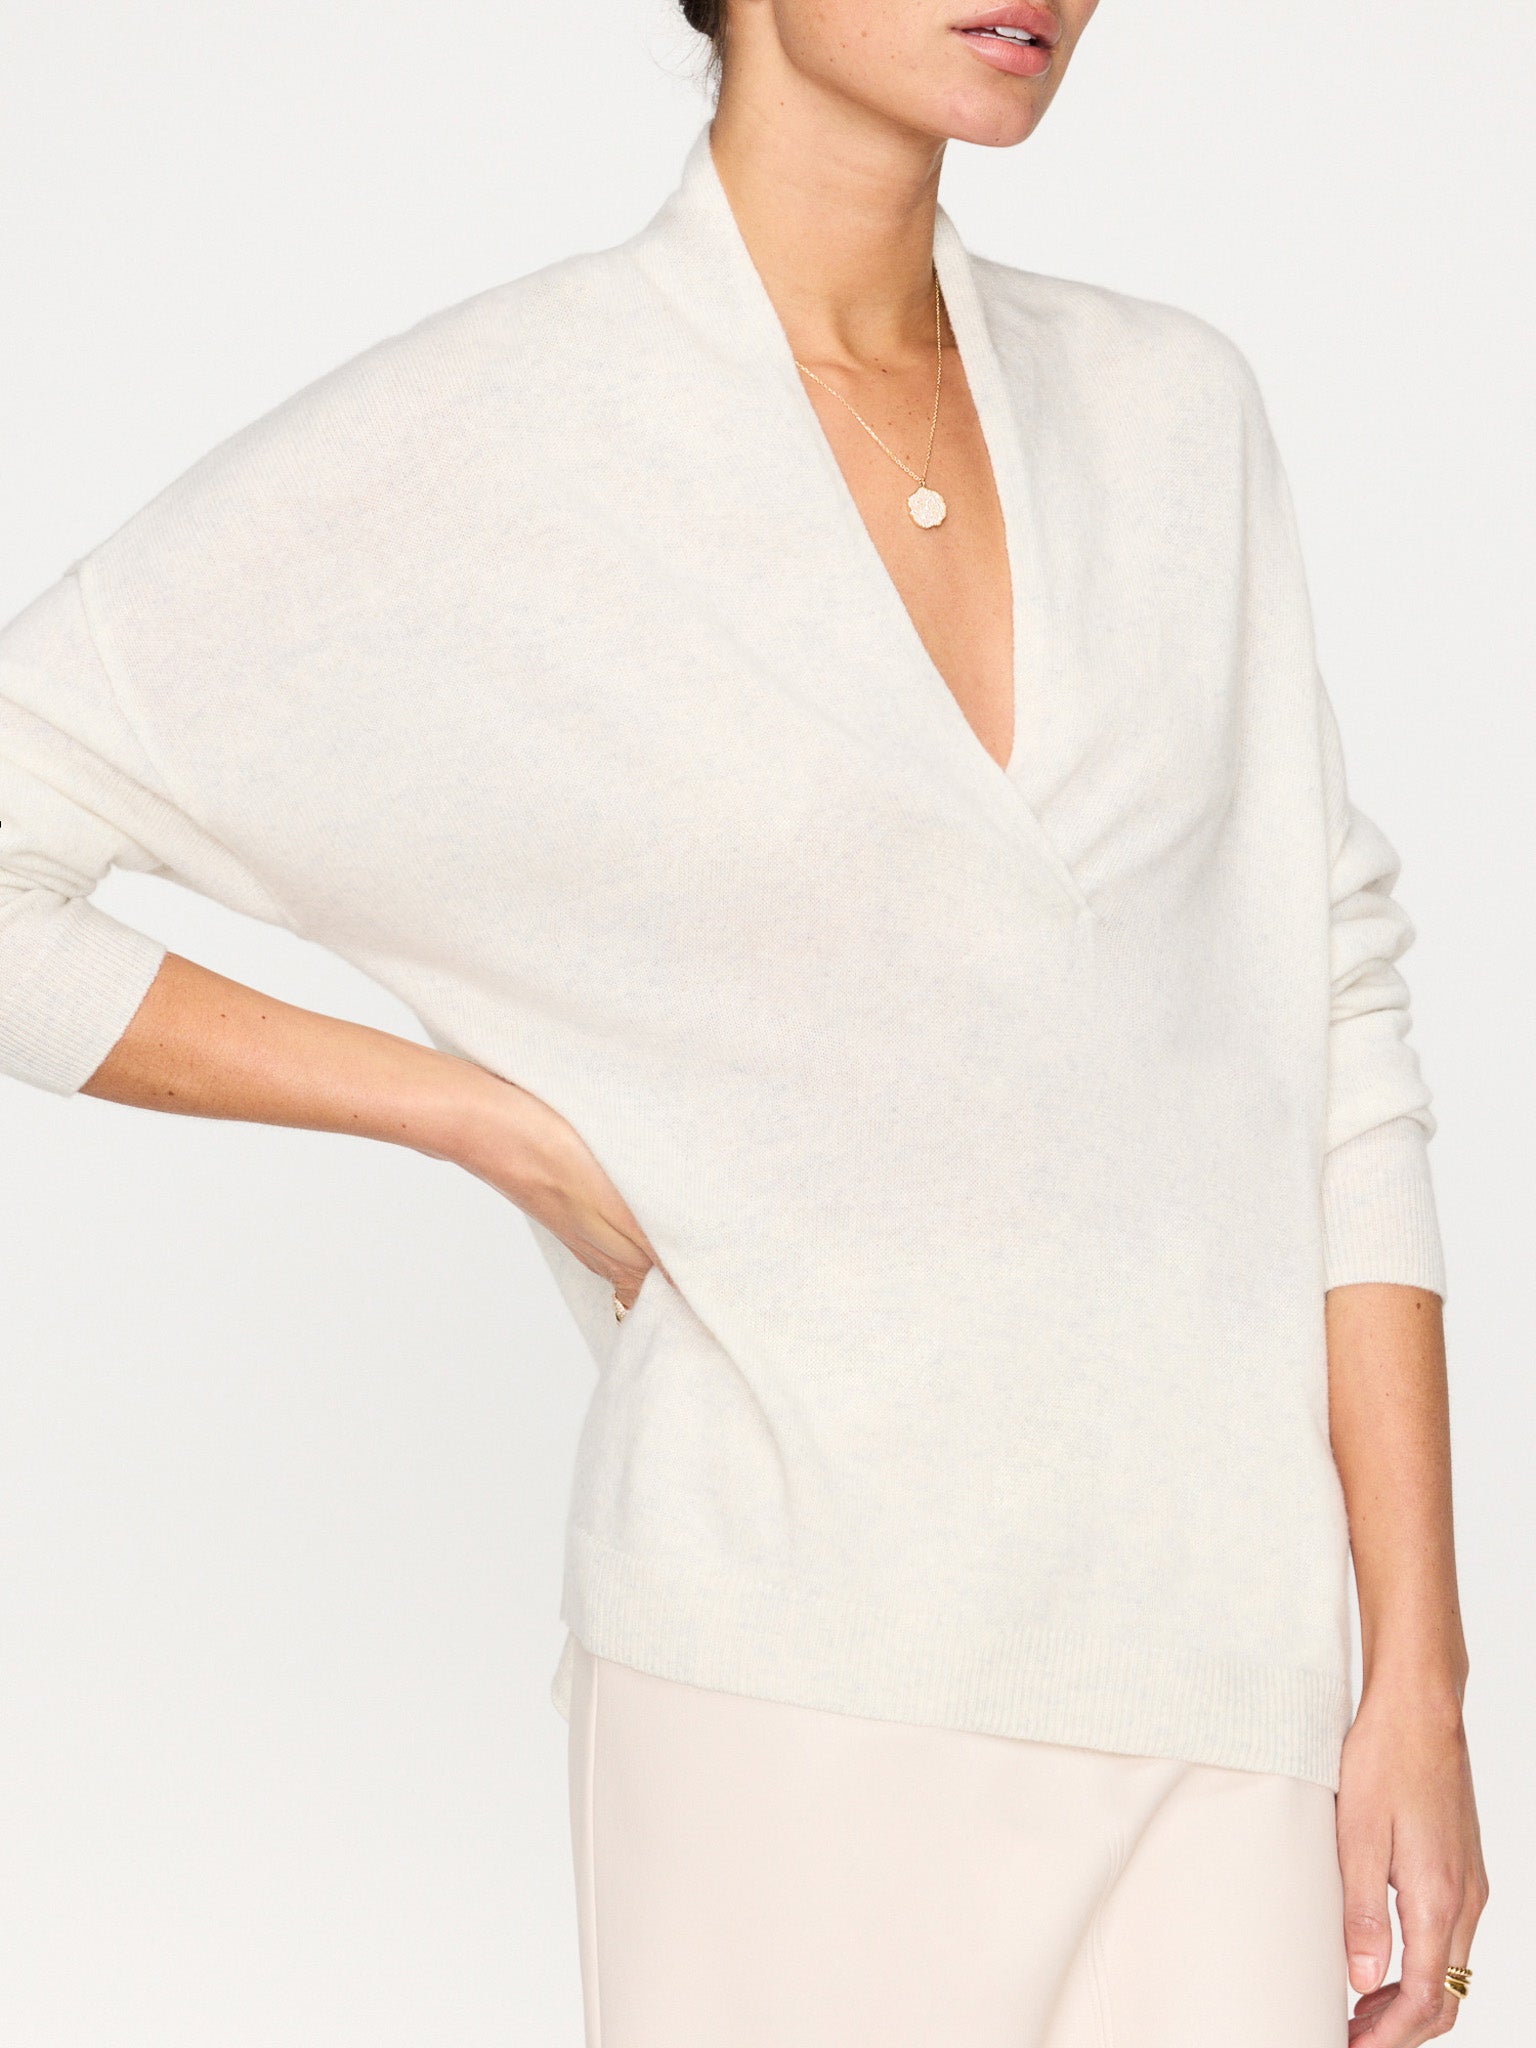 Siena v-neck pullover white sweater side view 3